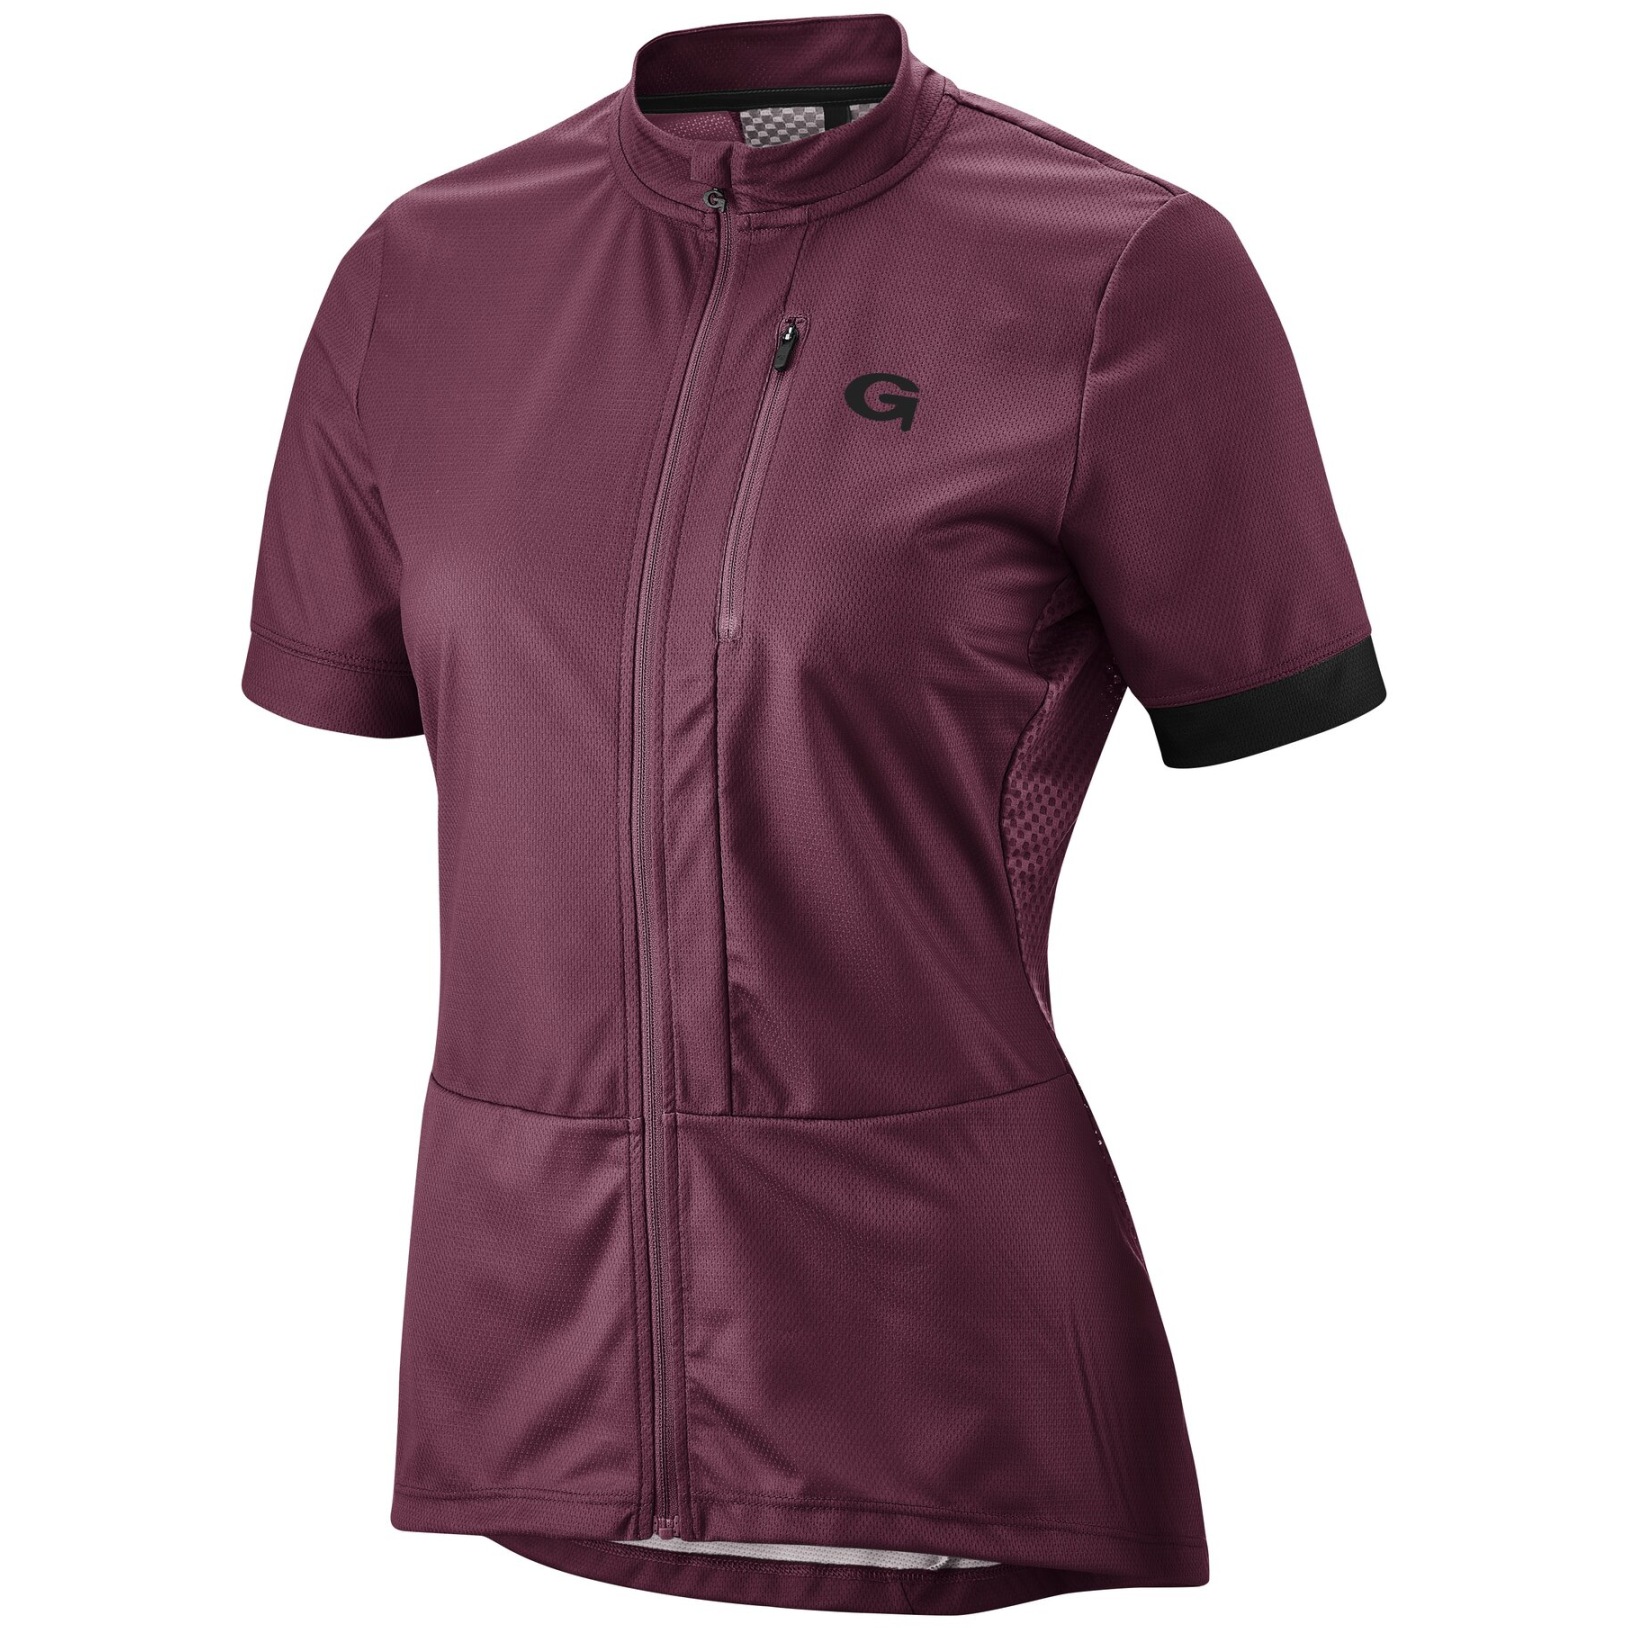 Foto de Gonso Maillot Ciclismo Mujer - Careser - Prune